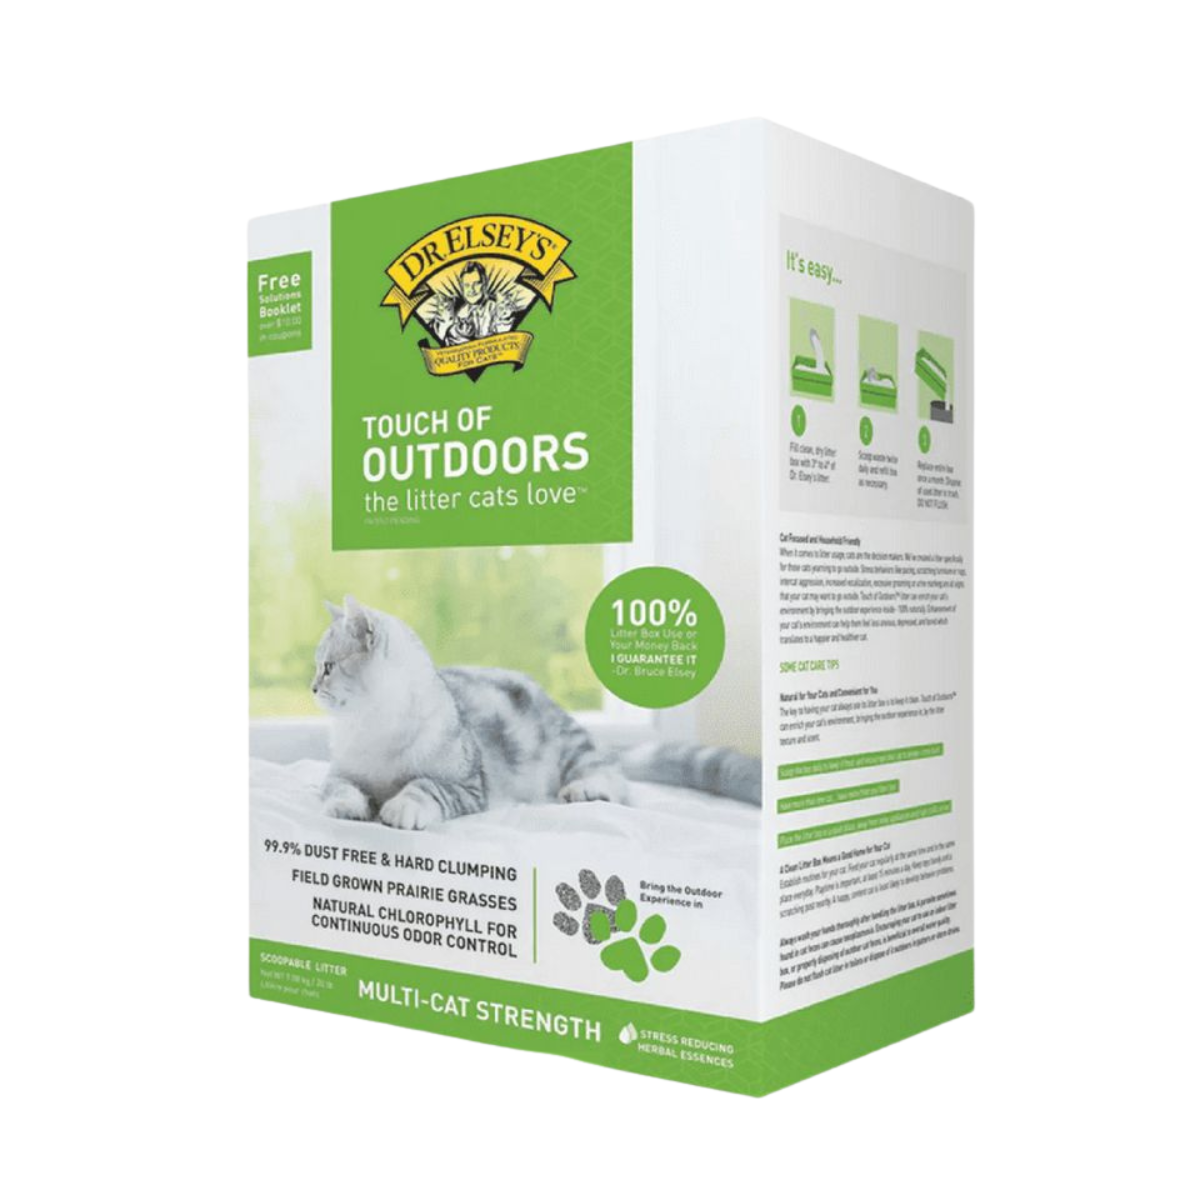 Dr. Elsey's - Touch Of Outdoors Cat Litter 20lb